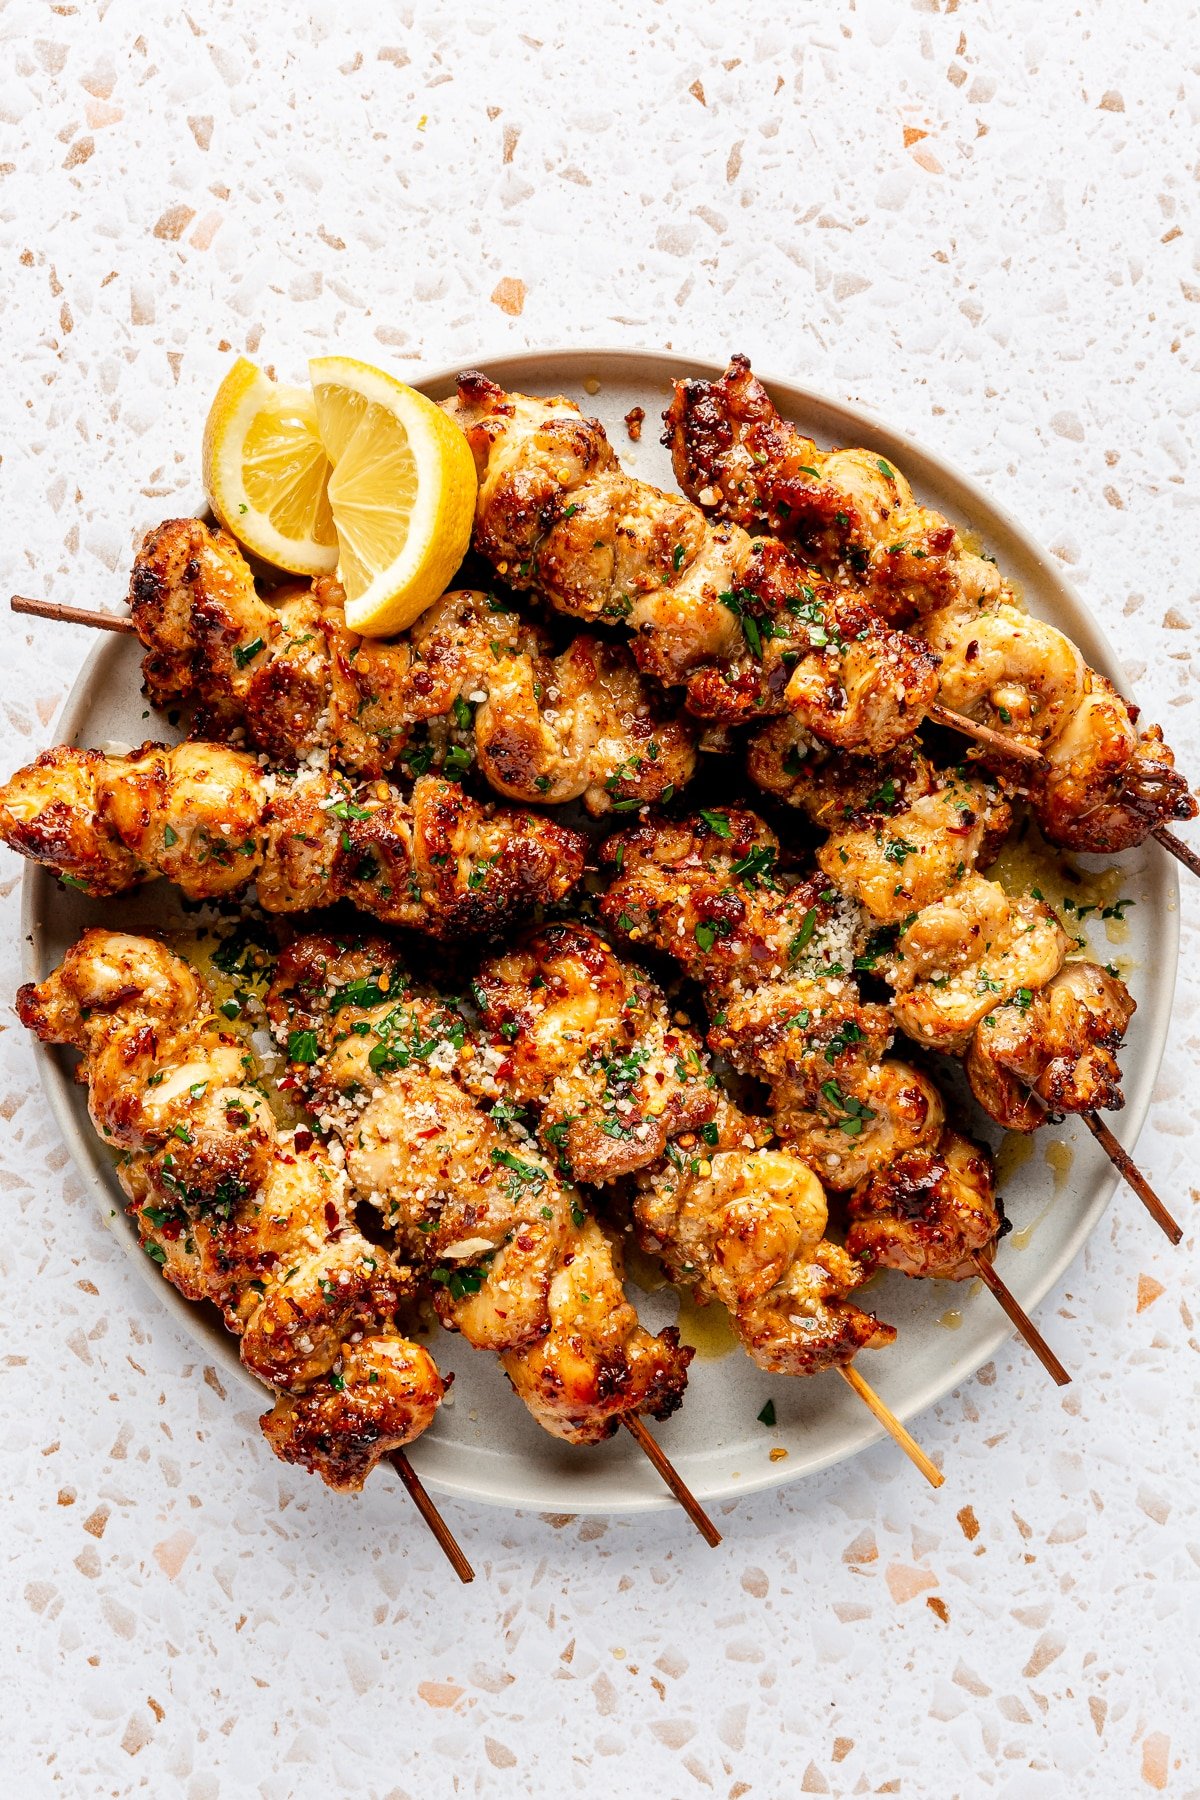 Fully prepared garlic parmesan chicken skewers sit on a grey serving plate. Lemon slices sit to the side.